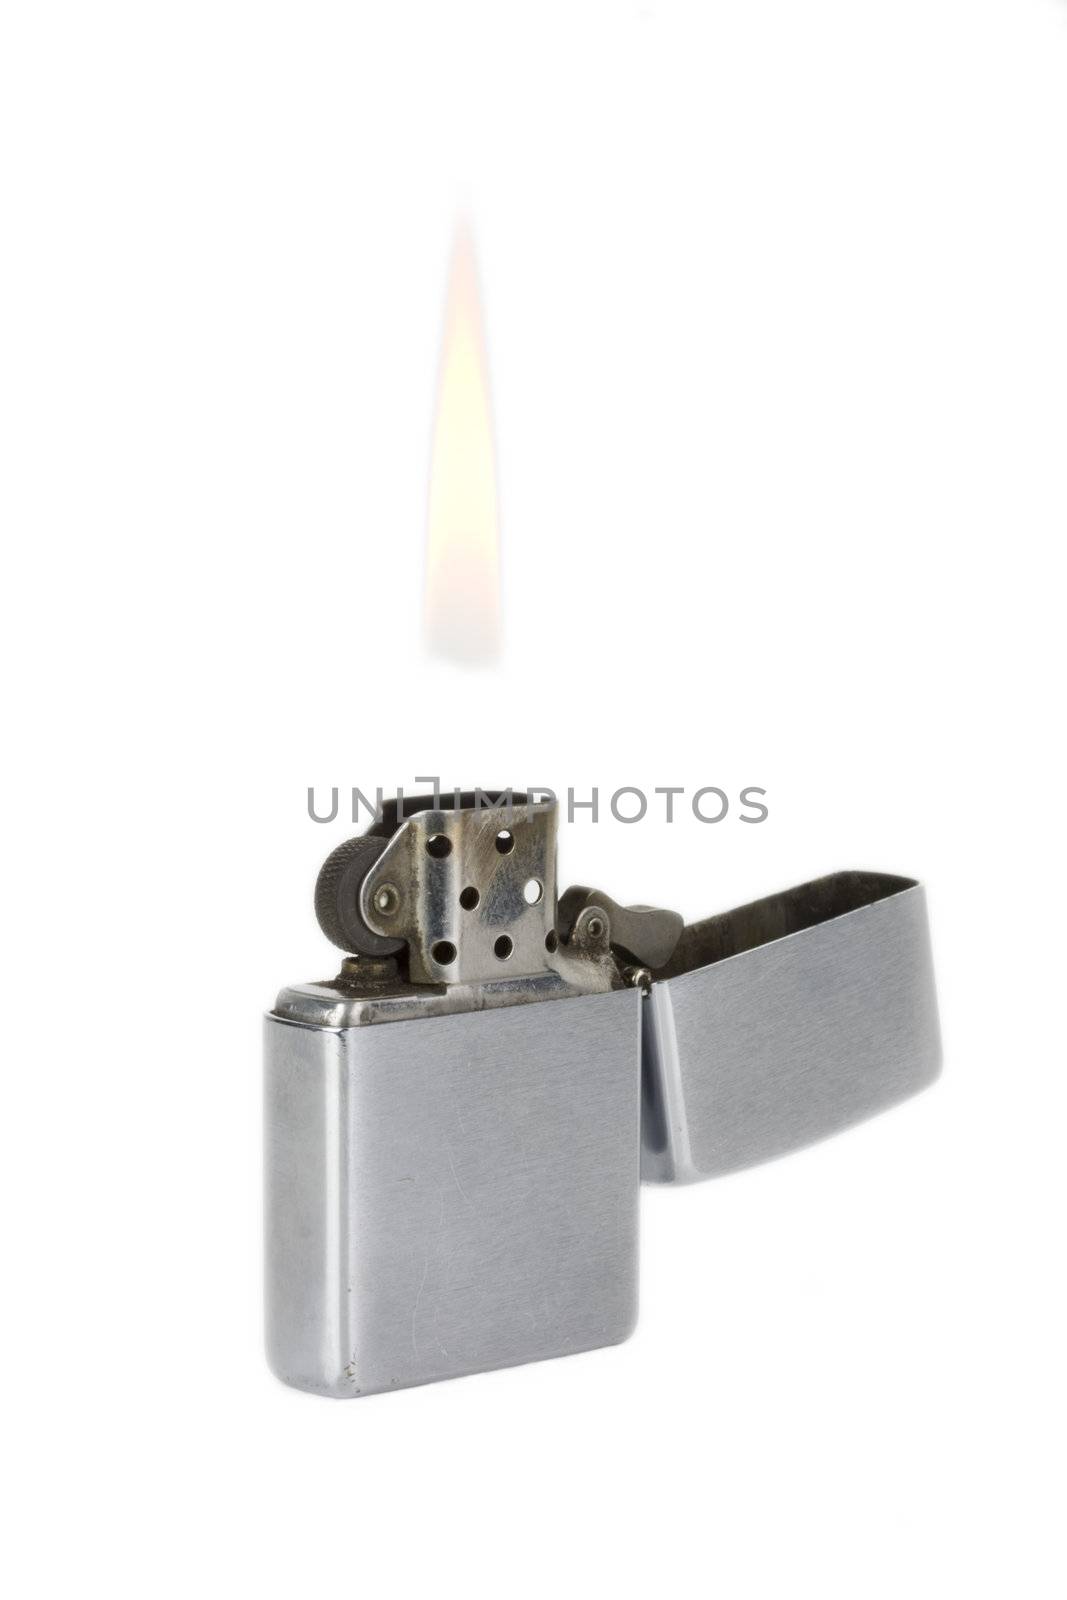 battered lighter with flame on white background